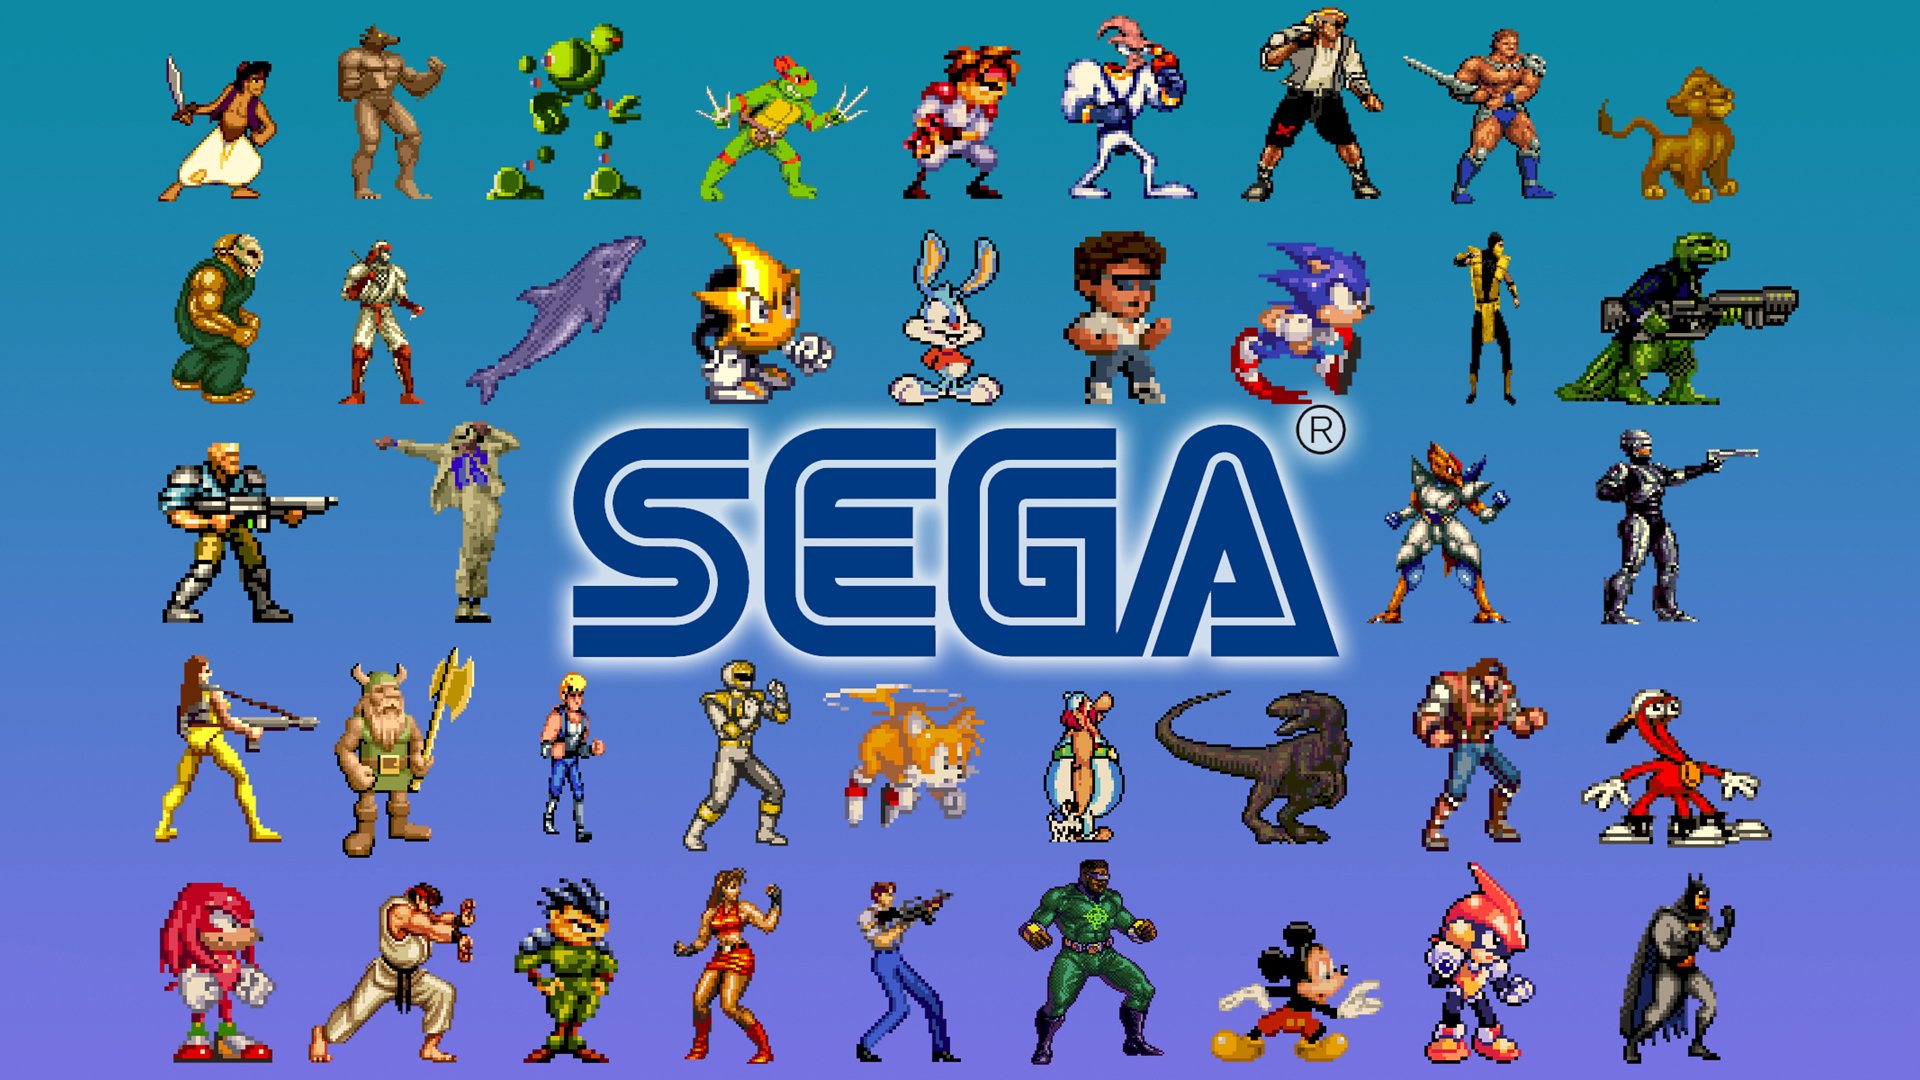 On June 3 SEGA will announce a new project - it seems to be retro-related